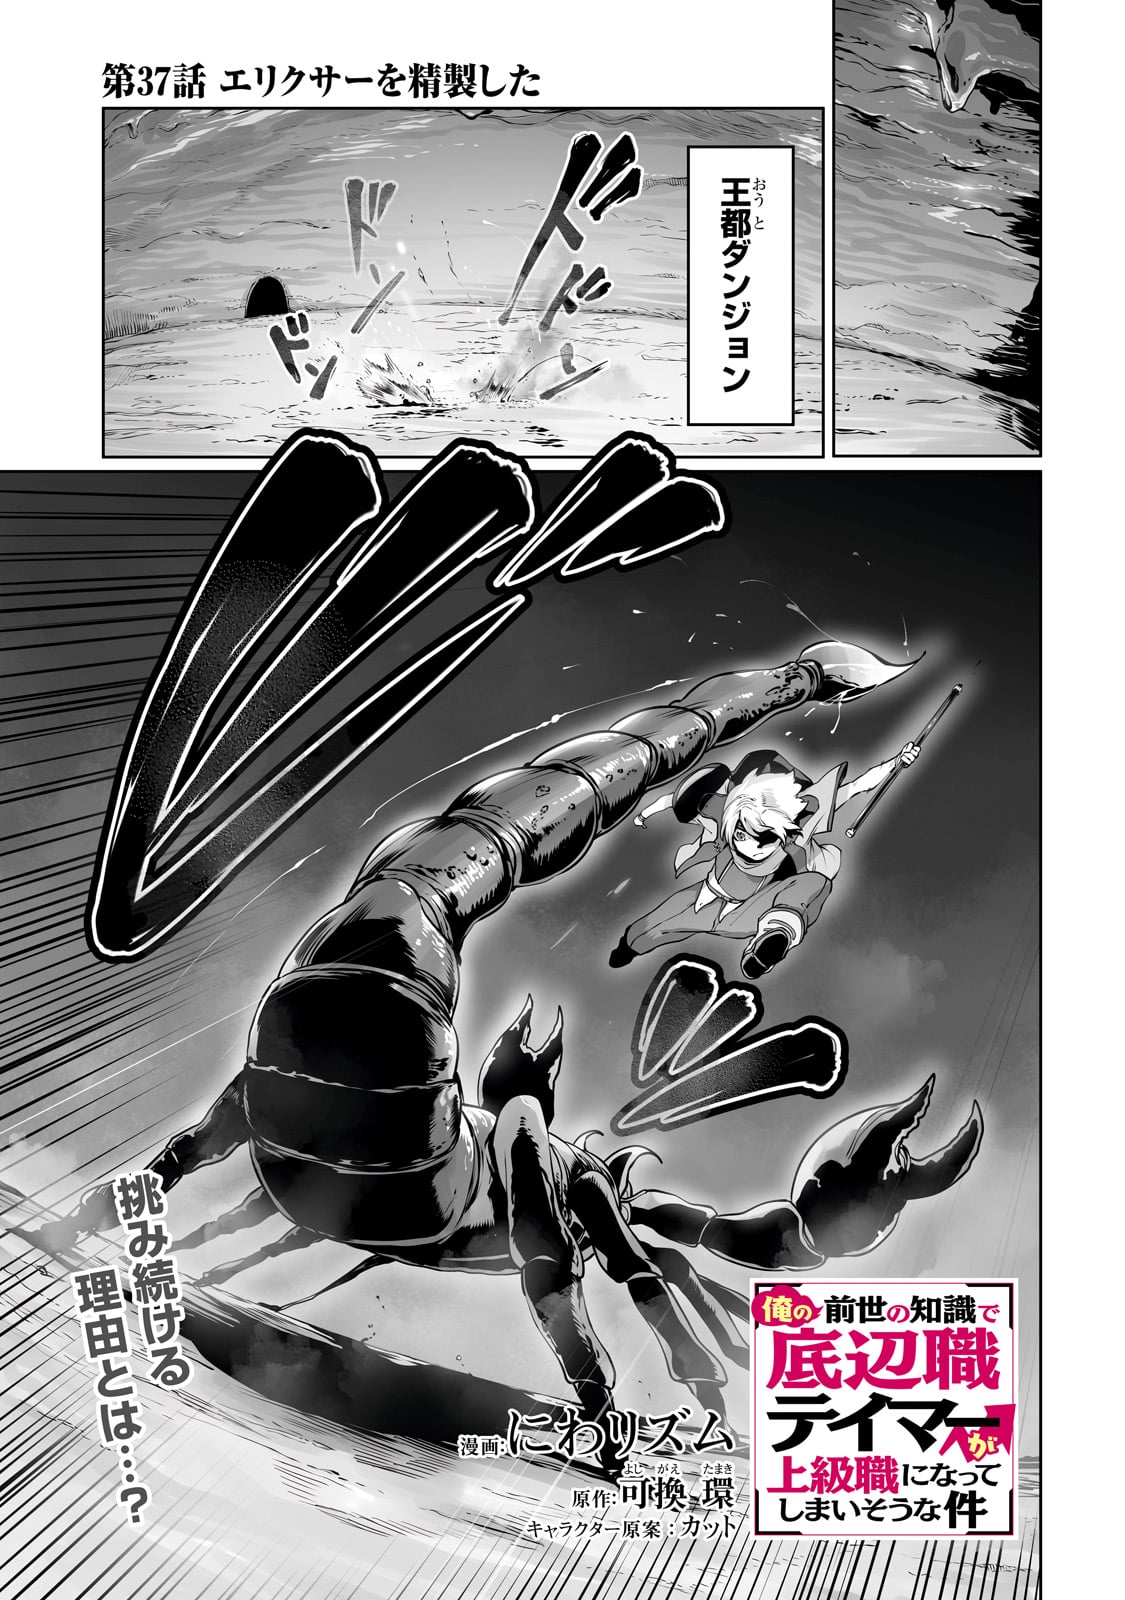 The Useless Tamer Will Turn Into the Top Unconsciously by My Previous Life Knowledge - Chapter 37 - Page 1